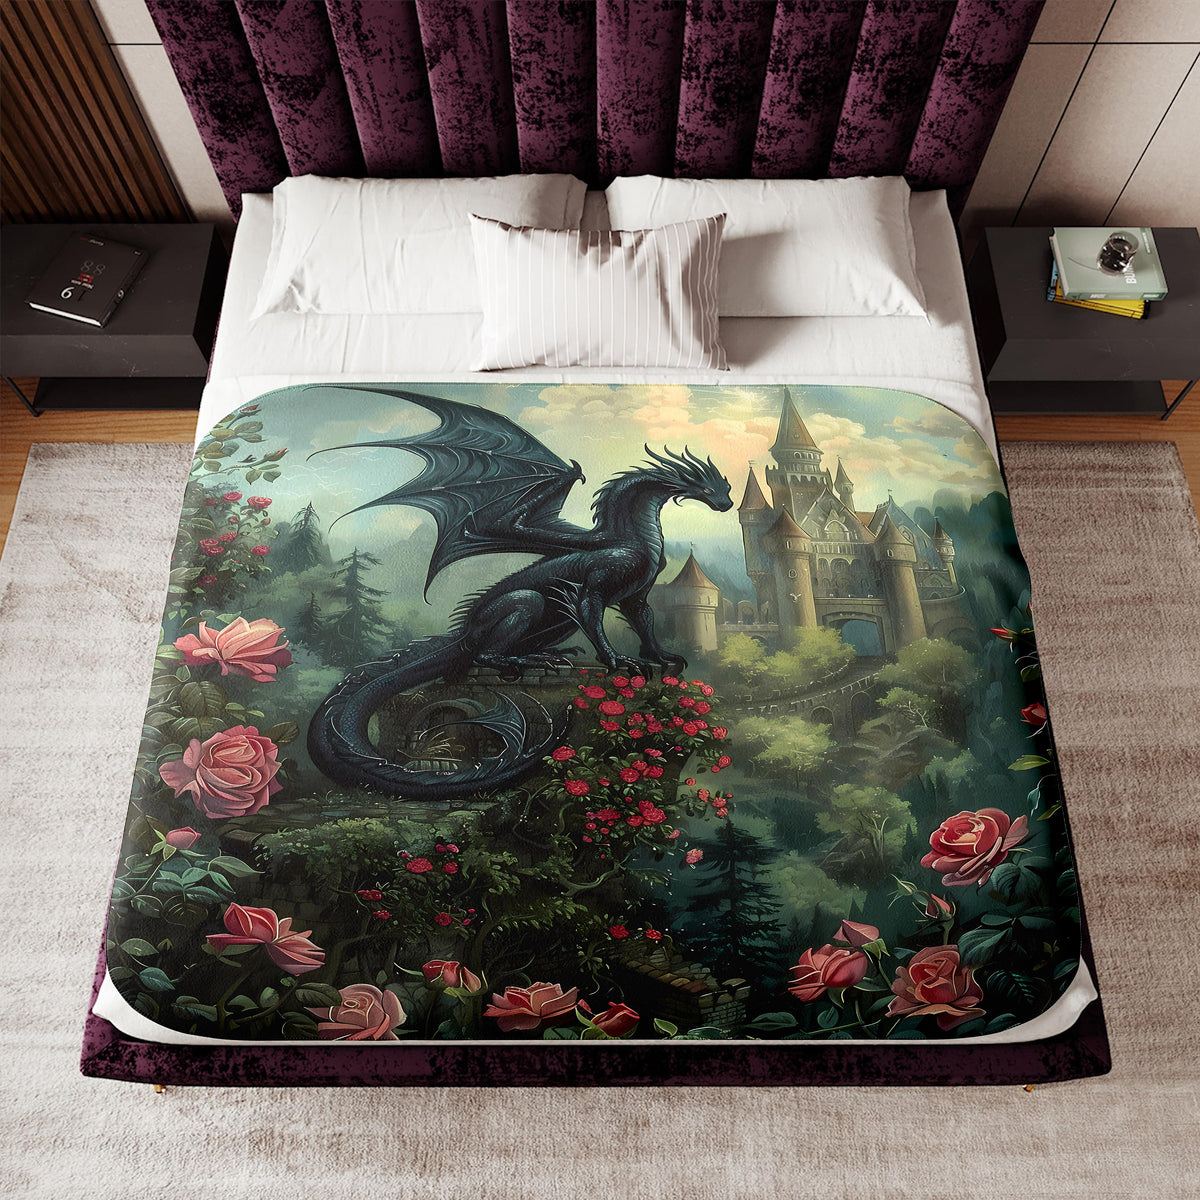 a bed with a dragon on it and a castle in the background